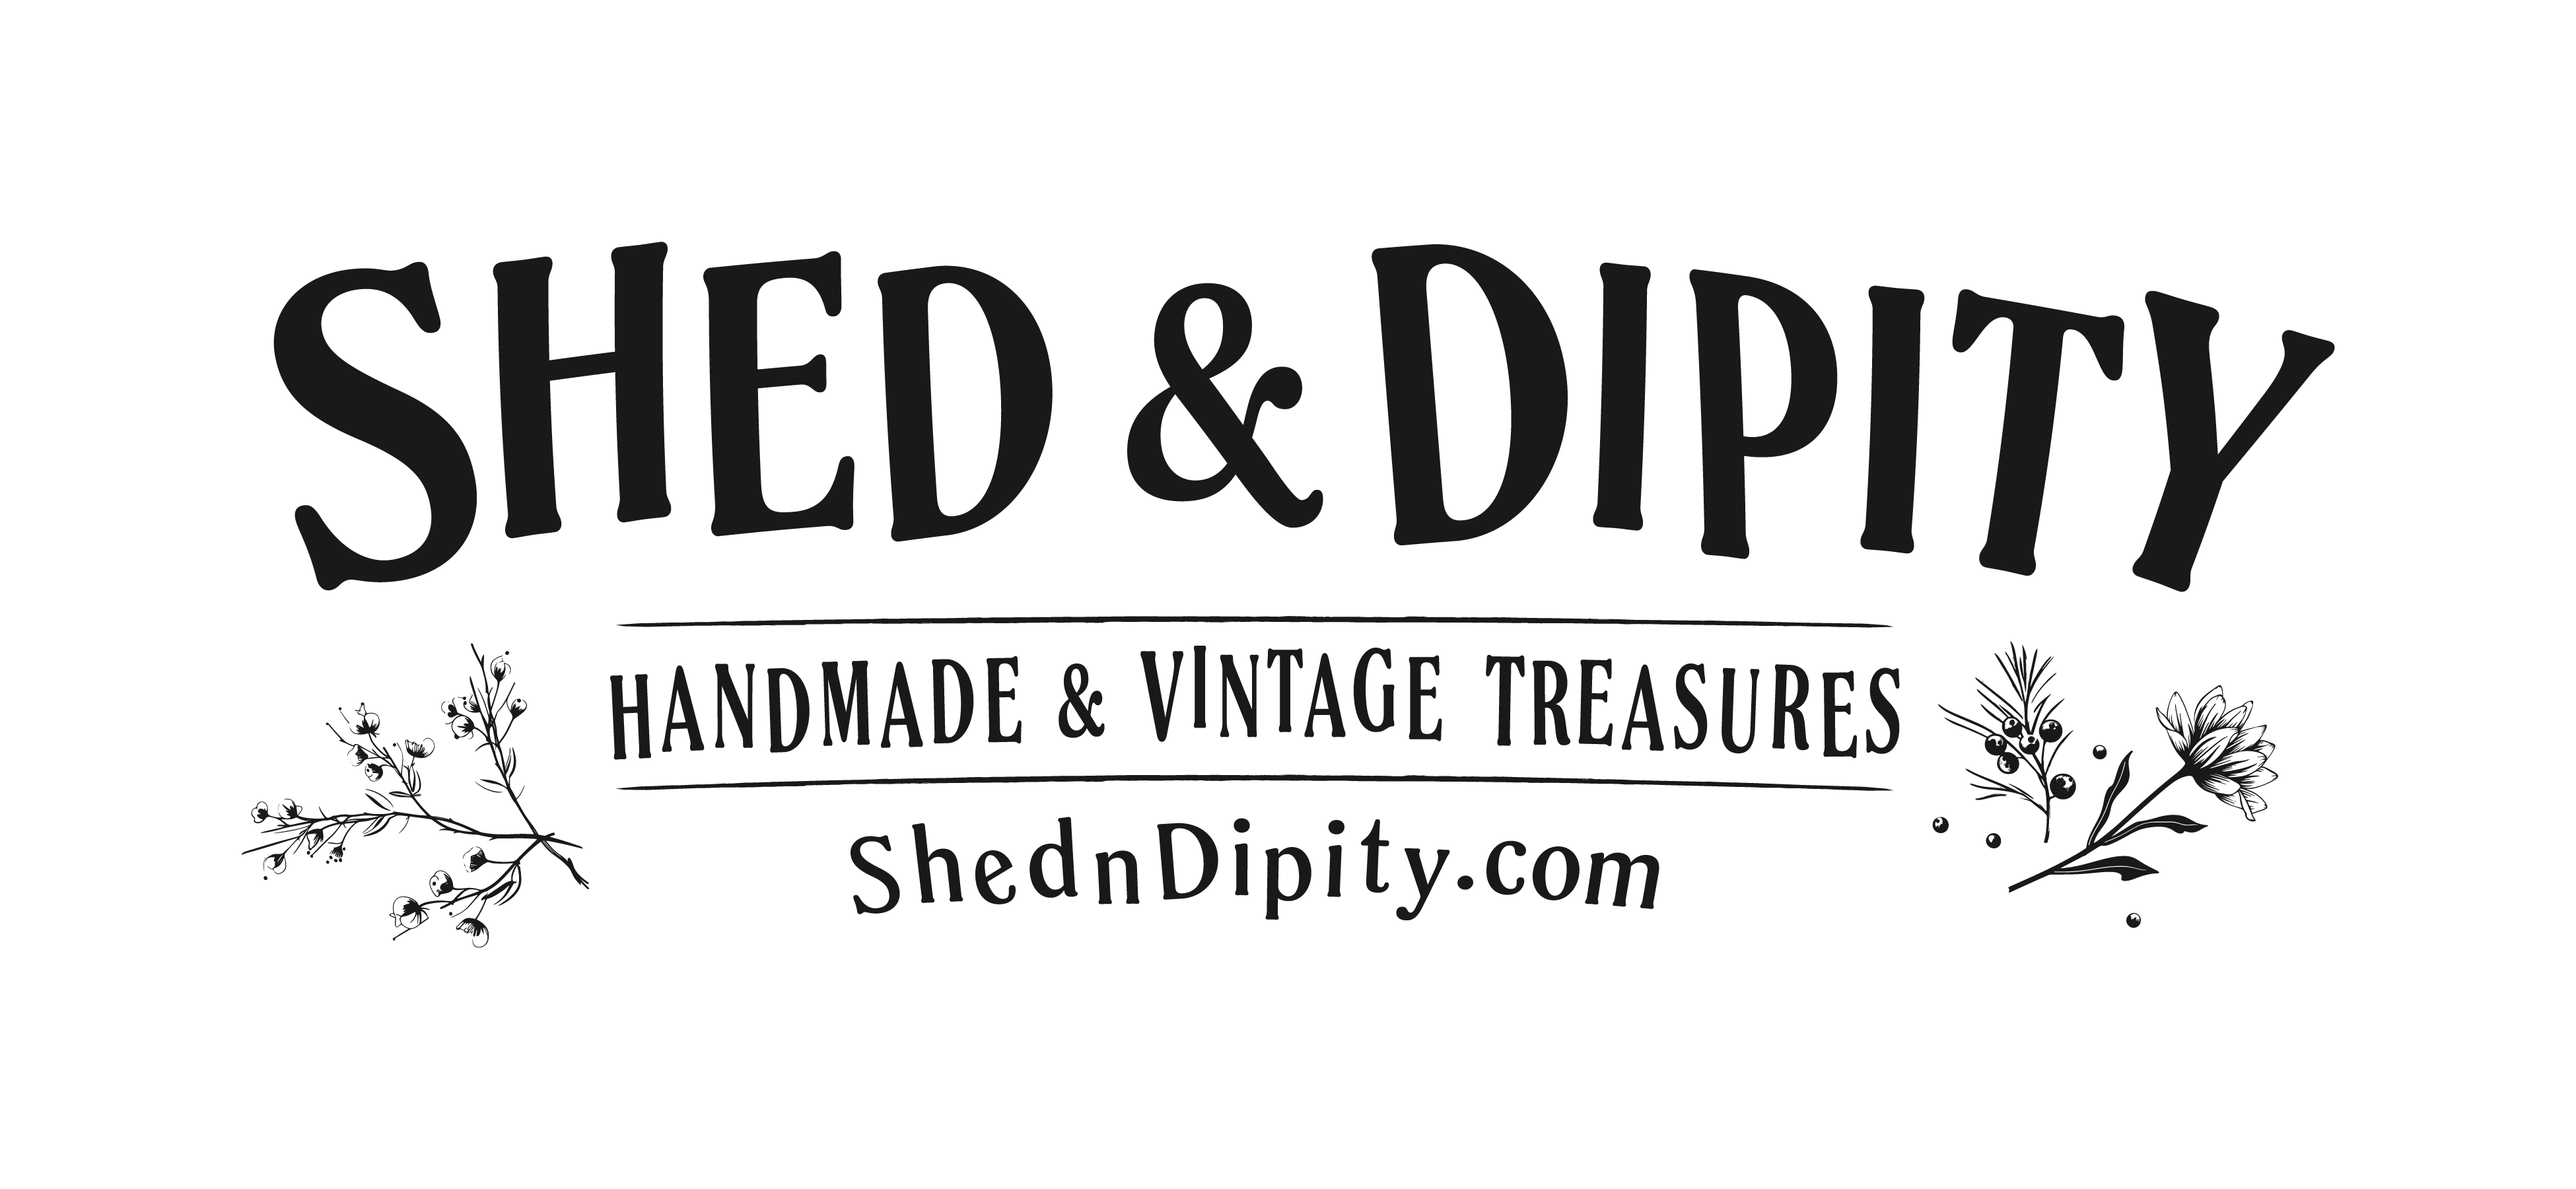 Shed & Dipity Text Image